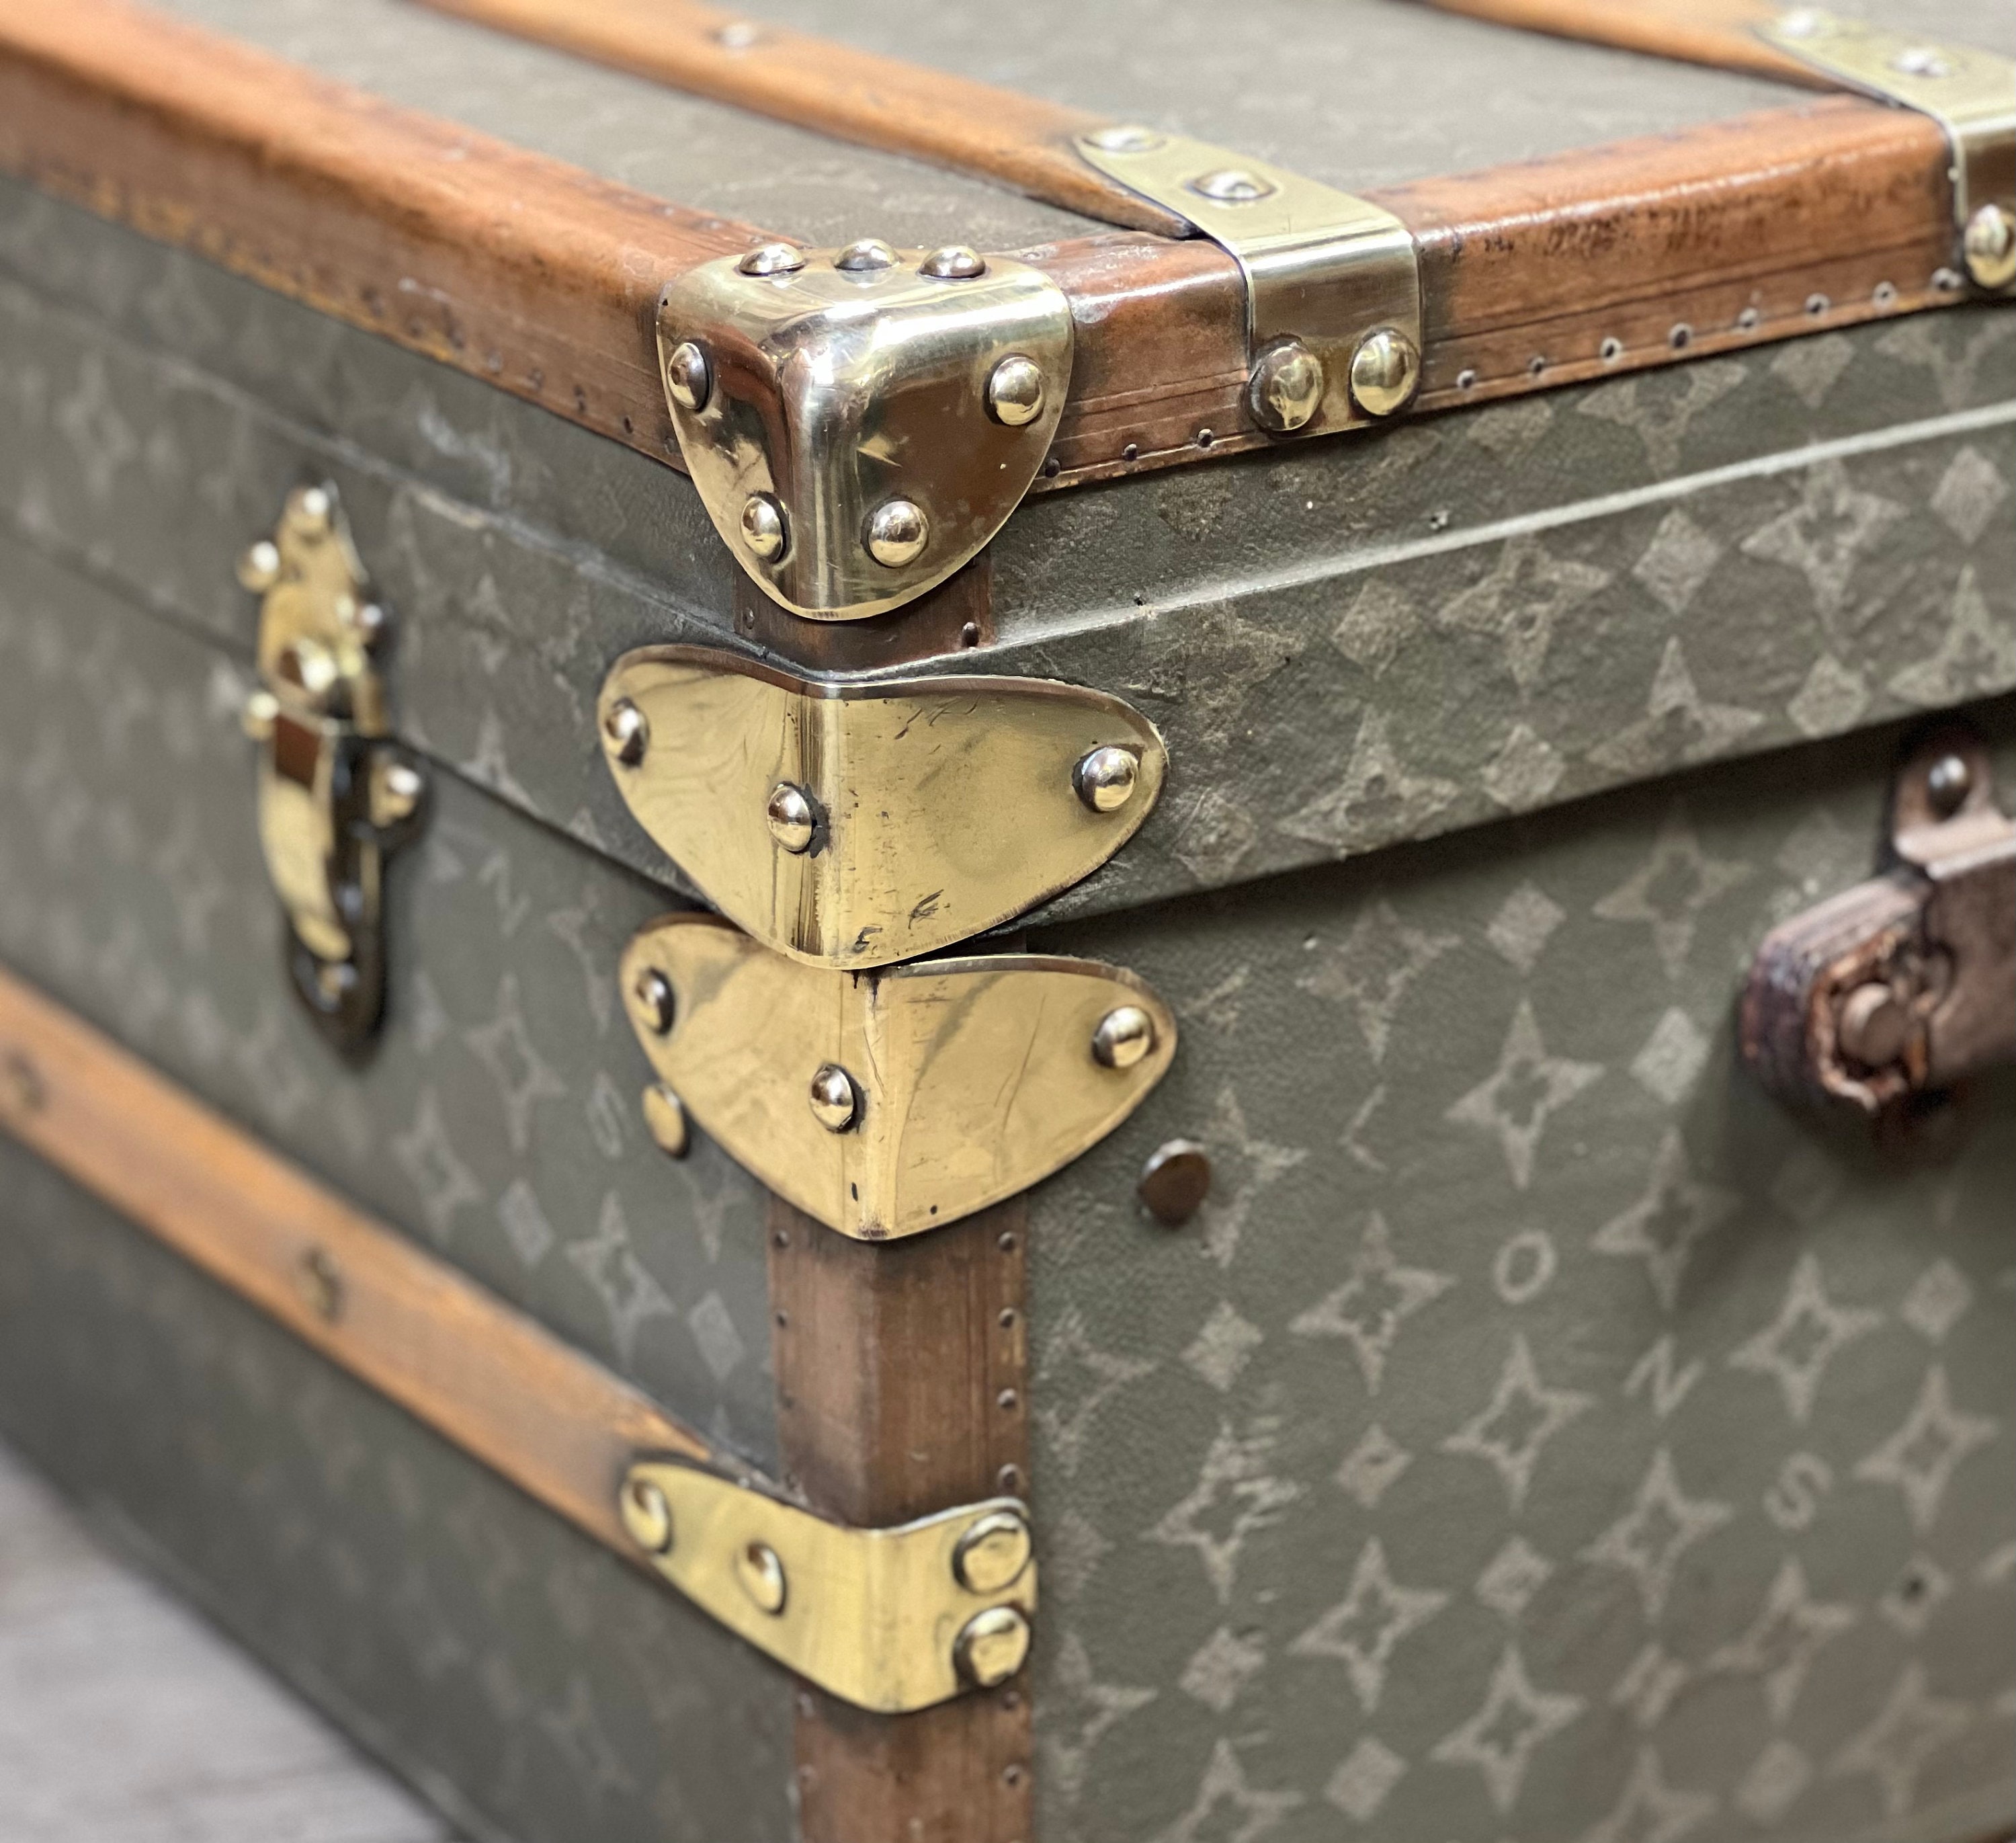 Antique Trunk in Damier Canvas from Louis Vuitton, 1900 for sale